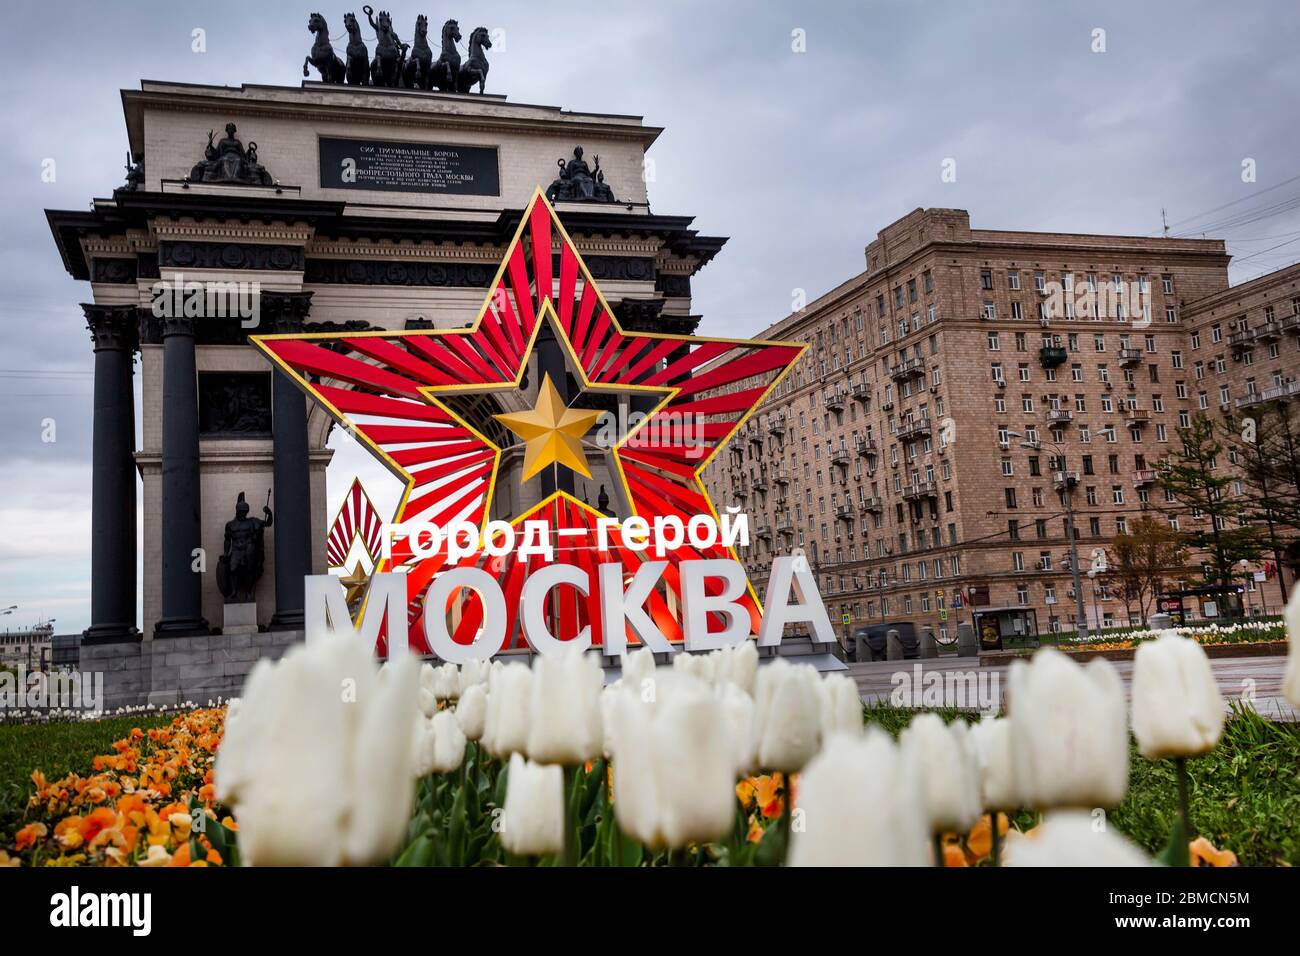 Moscow, Russia. 8th of May, 2020 An installation reading 'Hero city Moscow' dedicated to the 75th anniversary of the victory over Nazi Germany during World War II, by the Triumphal Arch, which commemorates Russia’s victory over Napoleon in 1812, on Kutuzovsky Avenue in Moscow, Russia Stock Photo